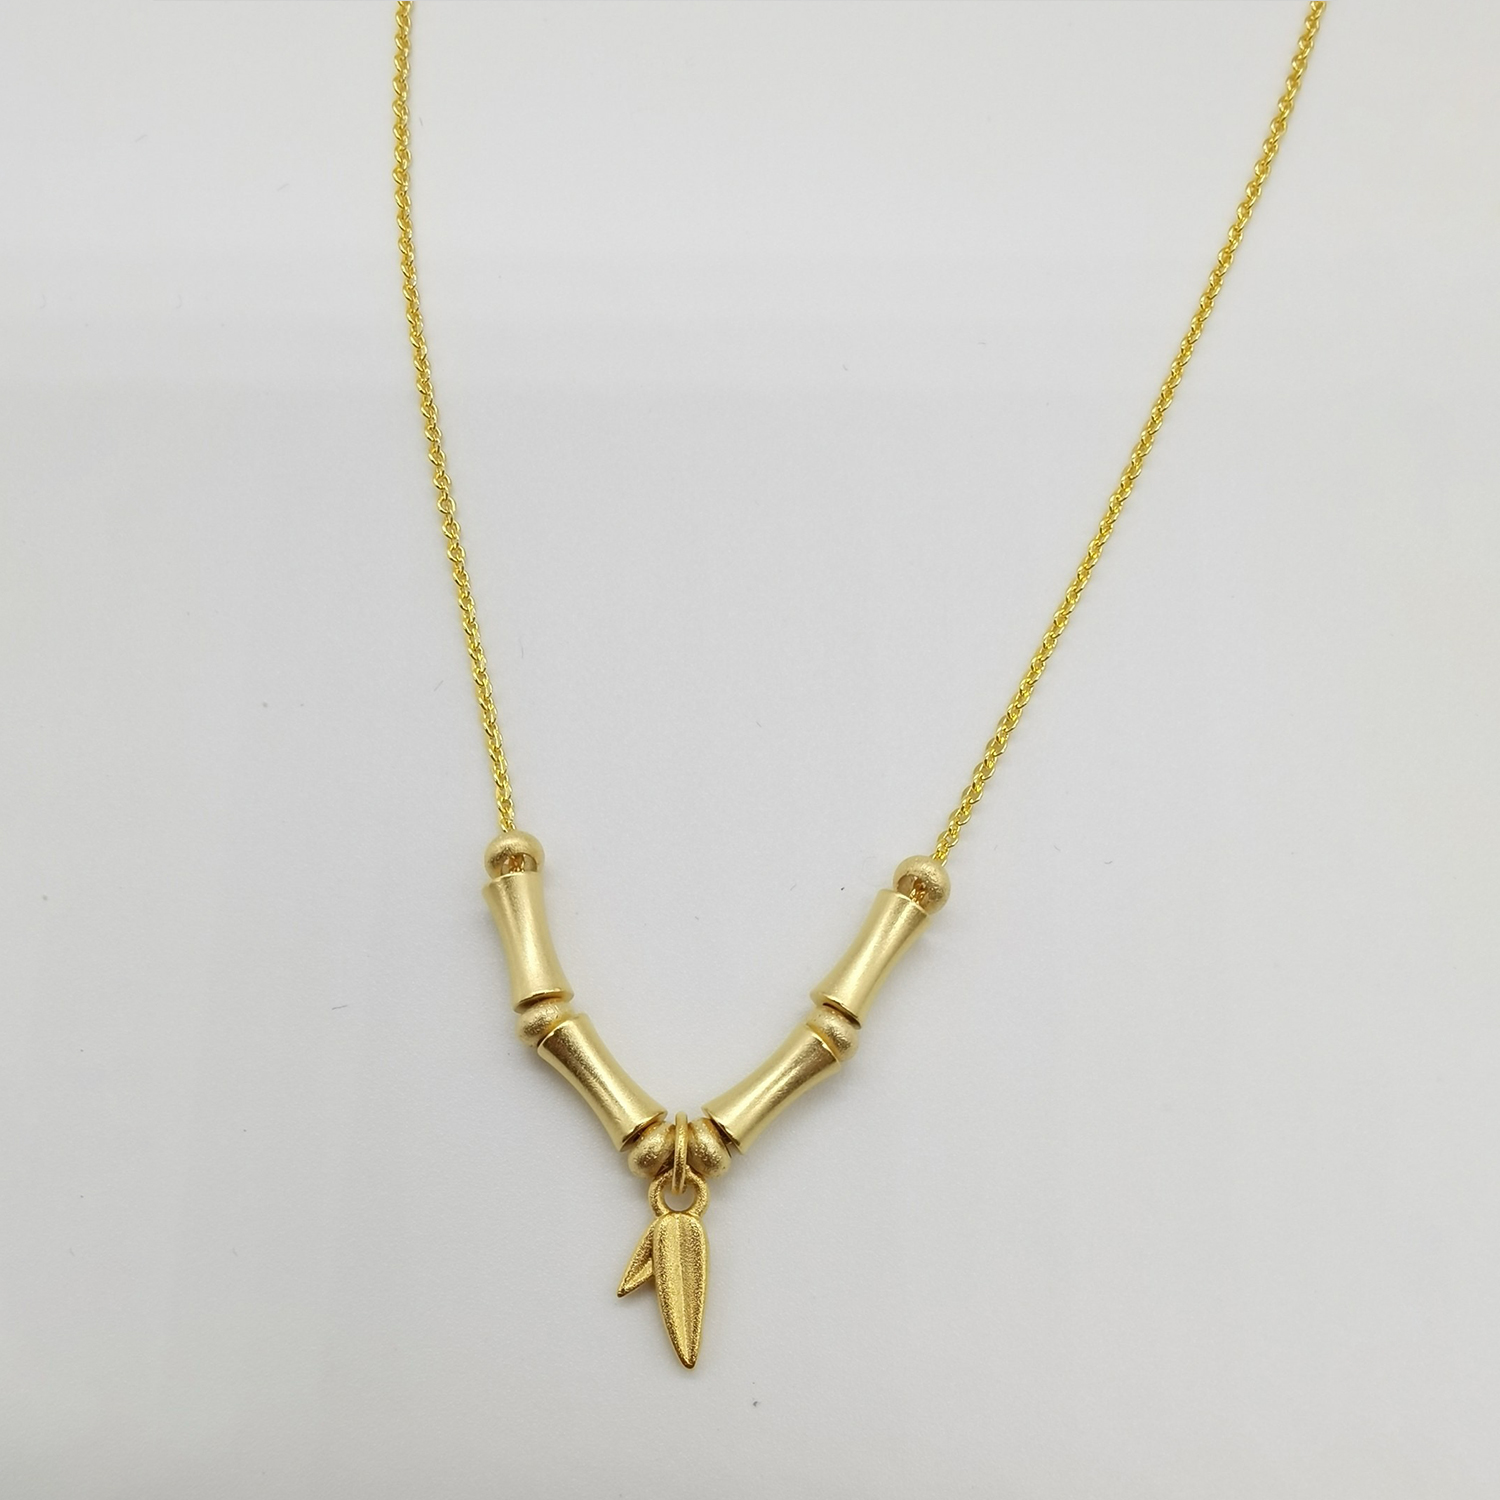 Alluvial gold ancient method vacuum electroplating 24K gold Bamboo peace necklace